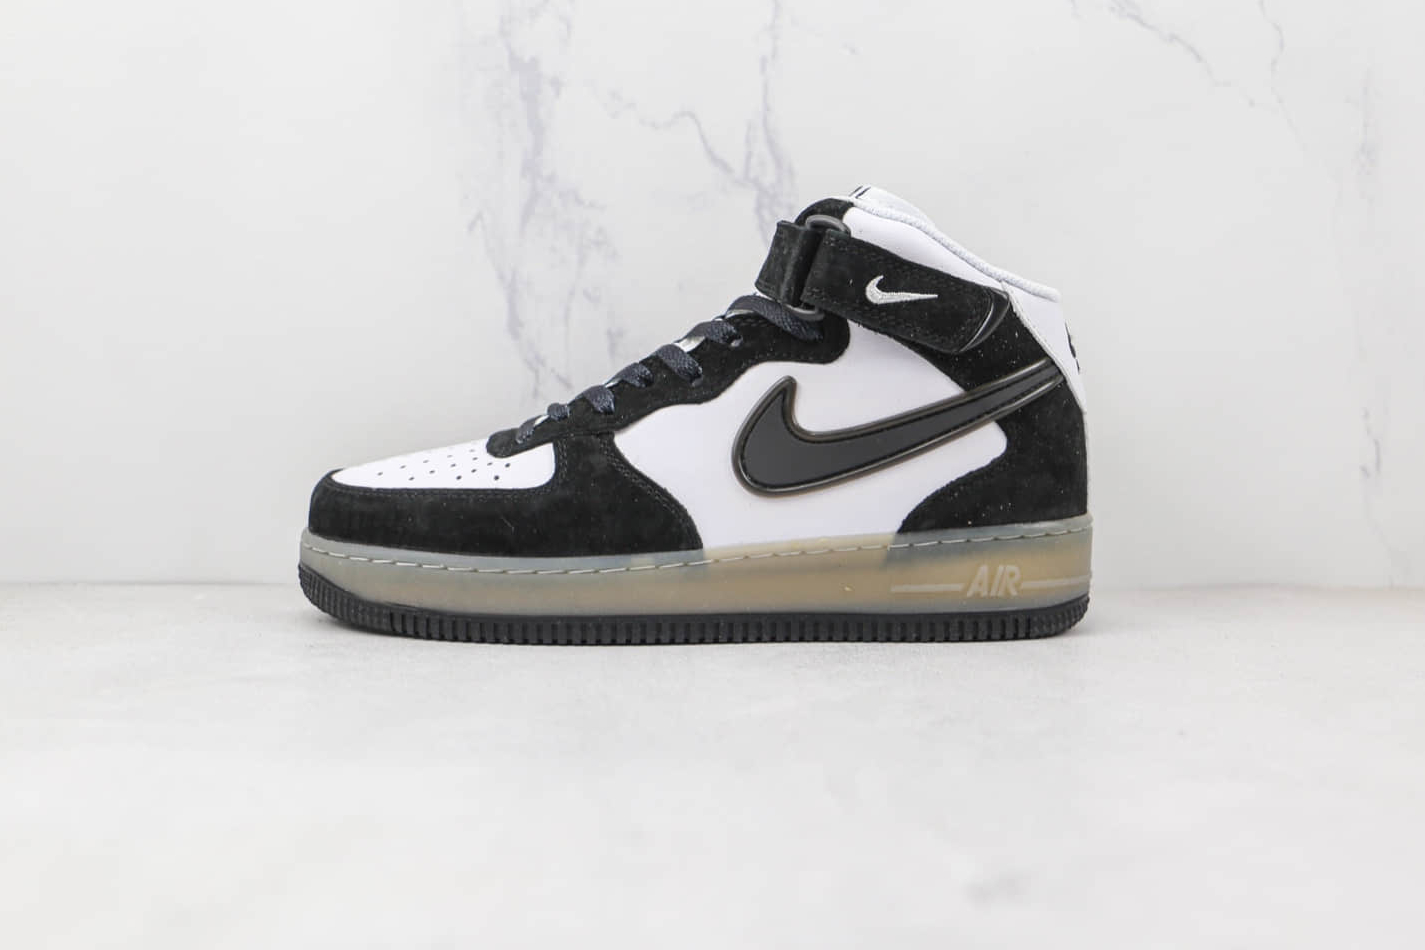 Nike Air Force 1 07 Mid Slam Jam Black White Grey Shoes BC9825-101 - Stylish and Trendy Footwear for Men